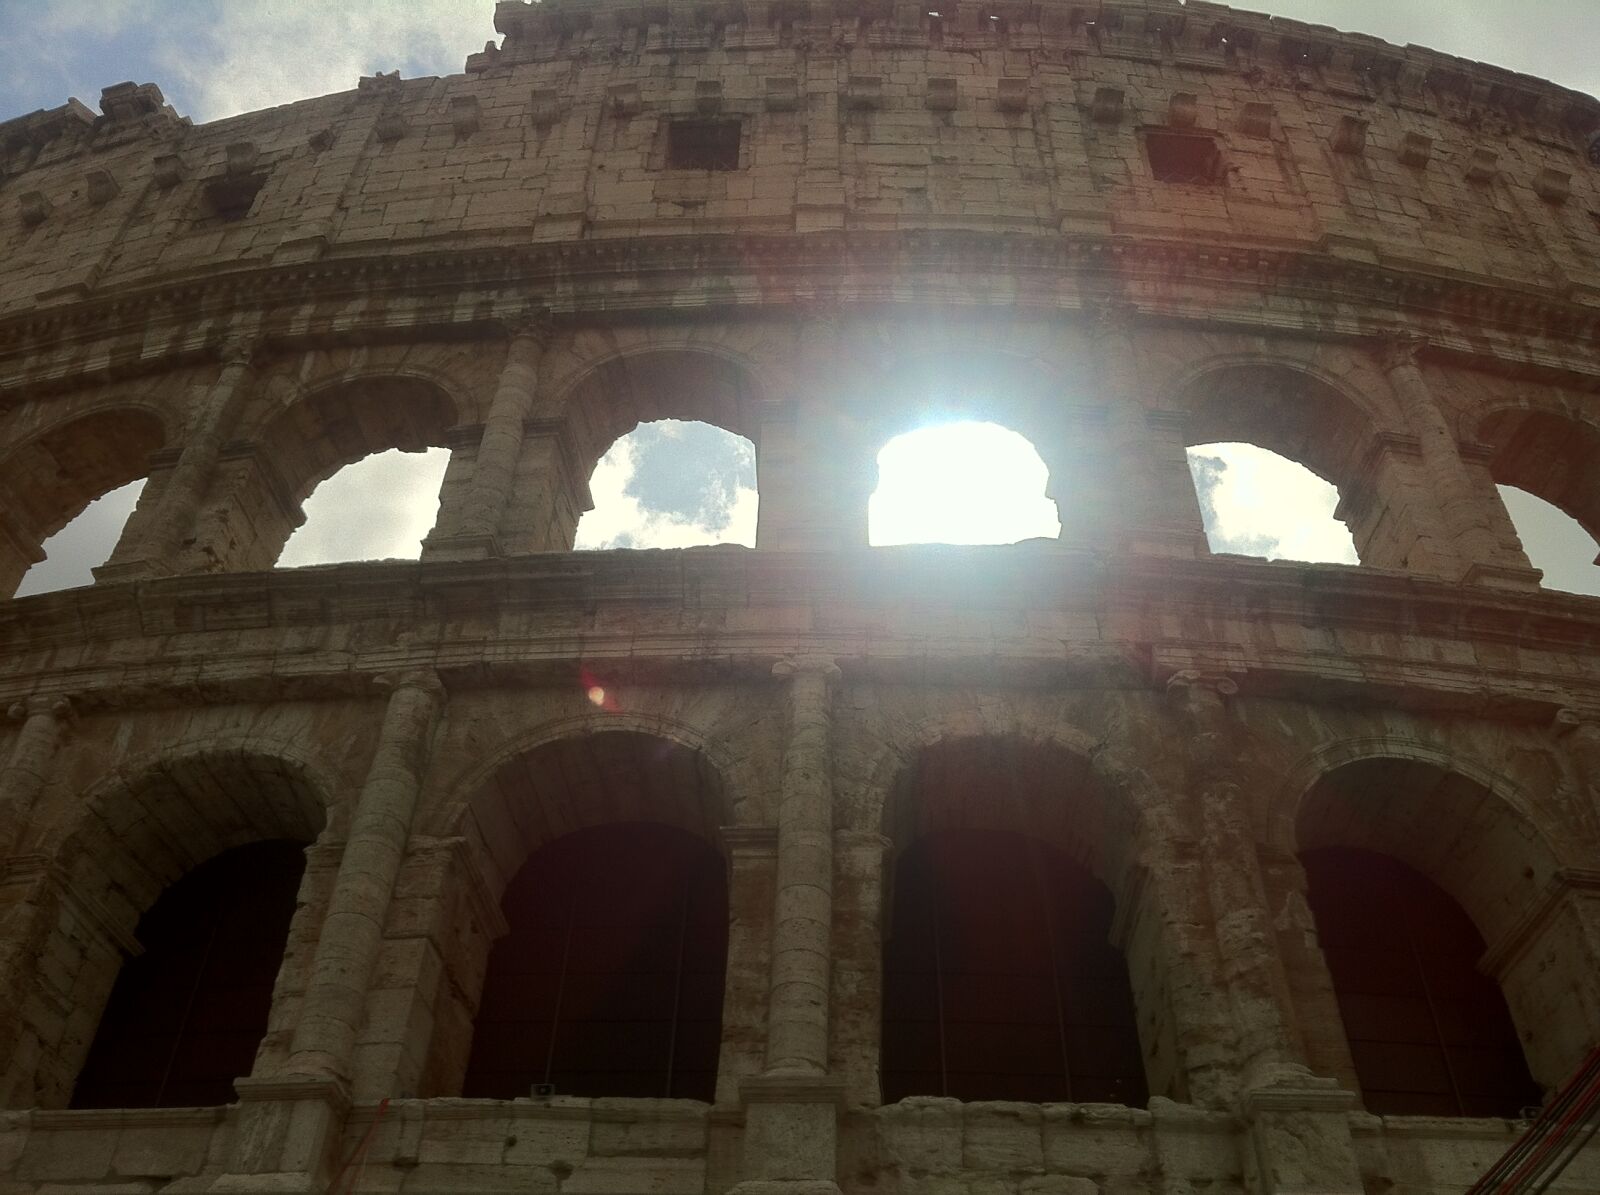 Apple iPhone 4 + iPhone 4 back camera 3.85mm f/2.8 sample photo. Colosseum, rome photography